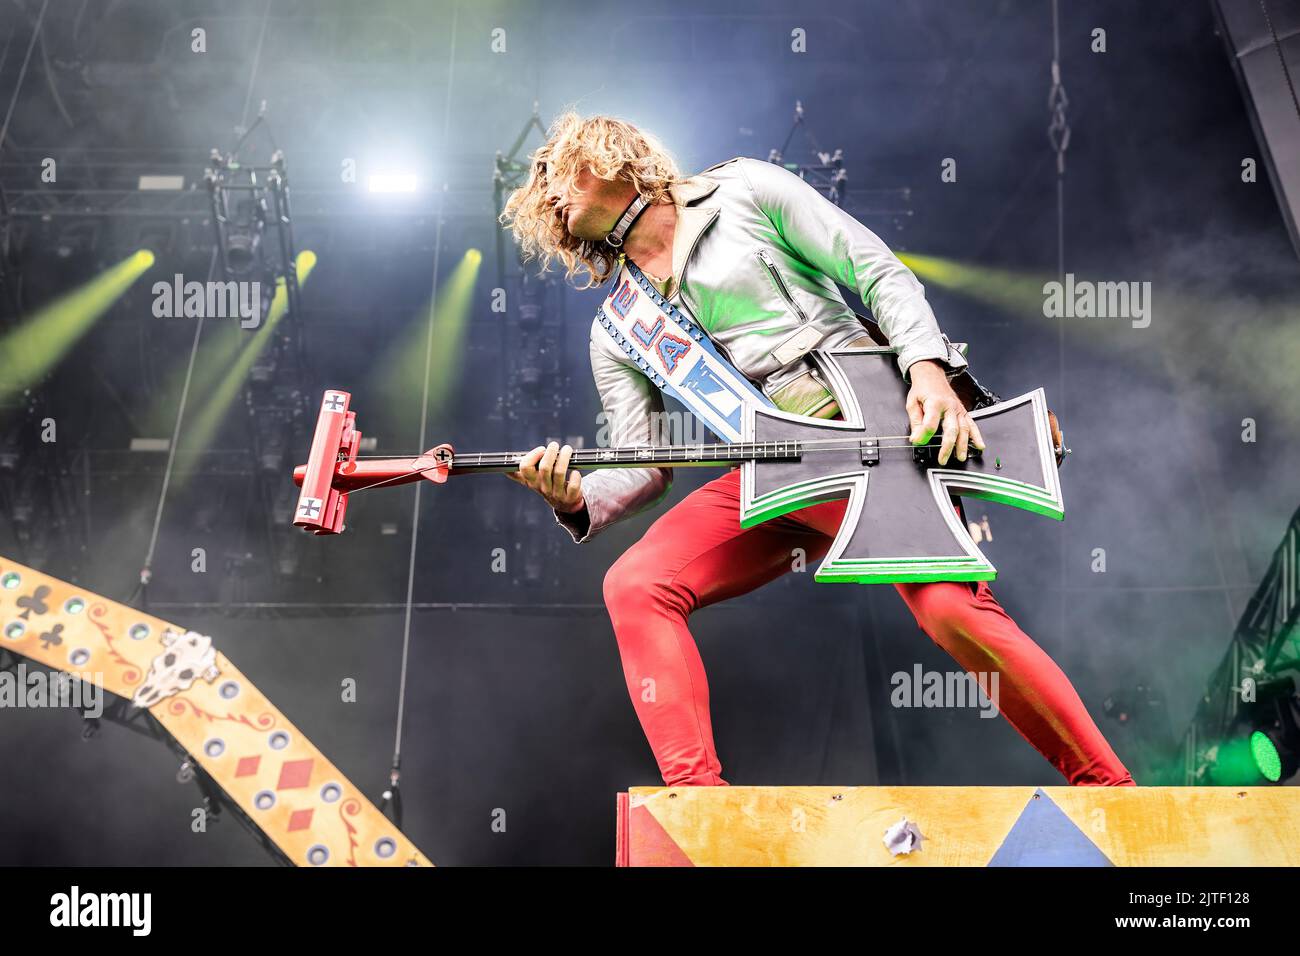 Solvesborg, Sweden. 10th, June 2022. The Danish rock band D-A-D performs a live concert during the Swedish music festival Sweden Rock Festival 2022 in Solvesborg. Here bass player Stig Pedersen is seen live on stage. (Photo credit: Gonzales Photo - Terje Dokken). Stock Photo